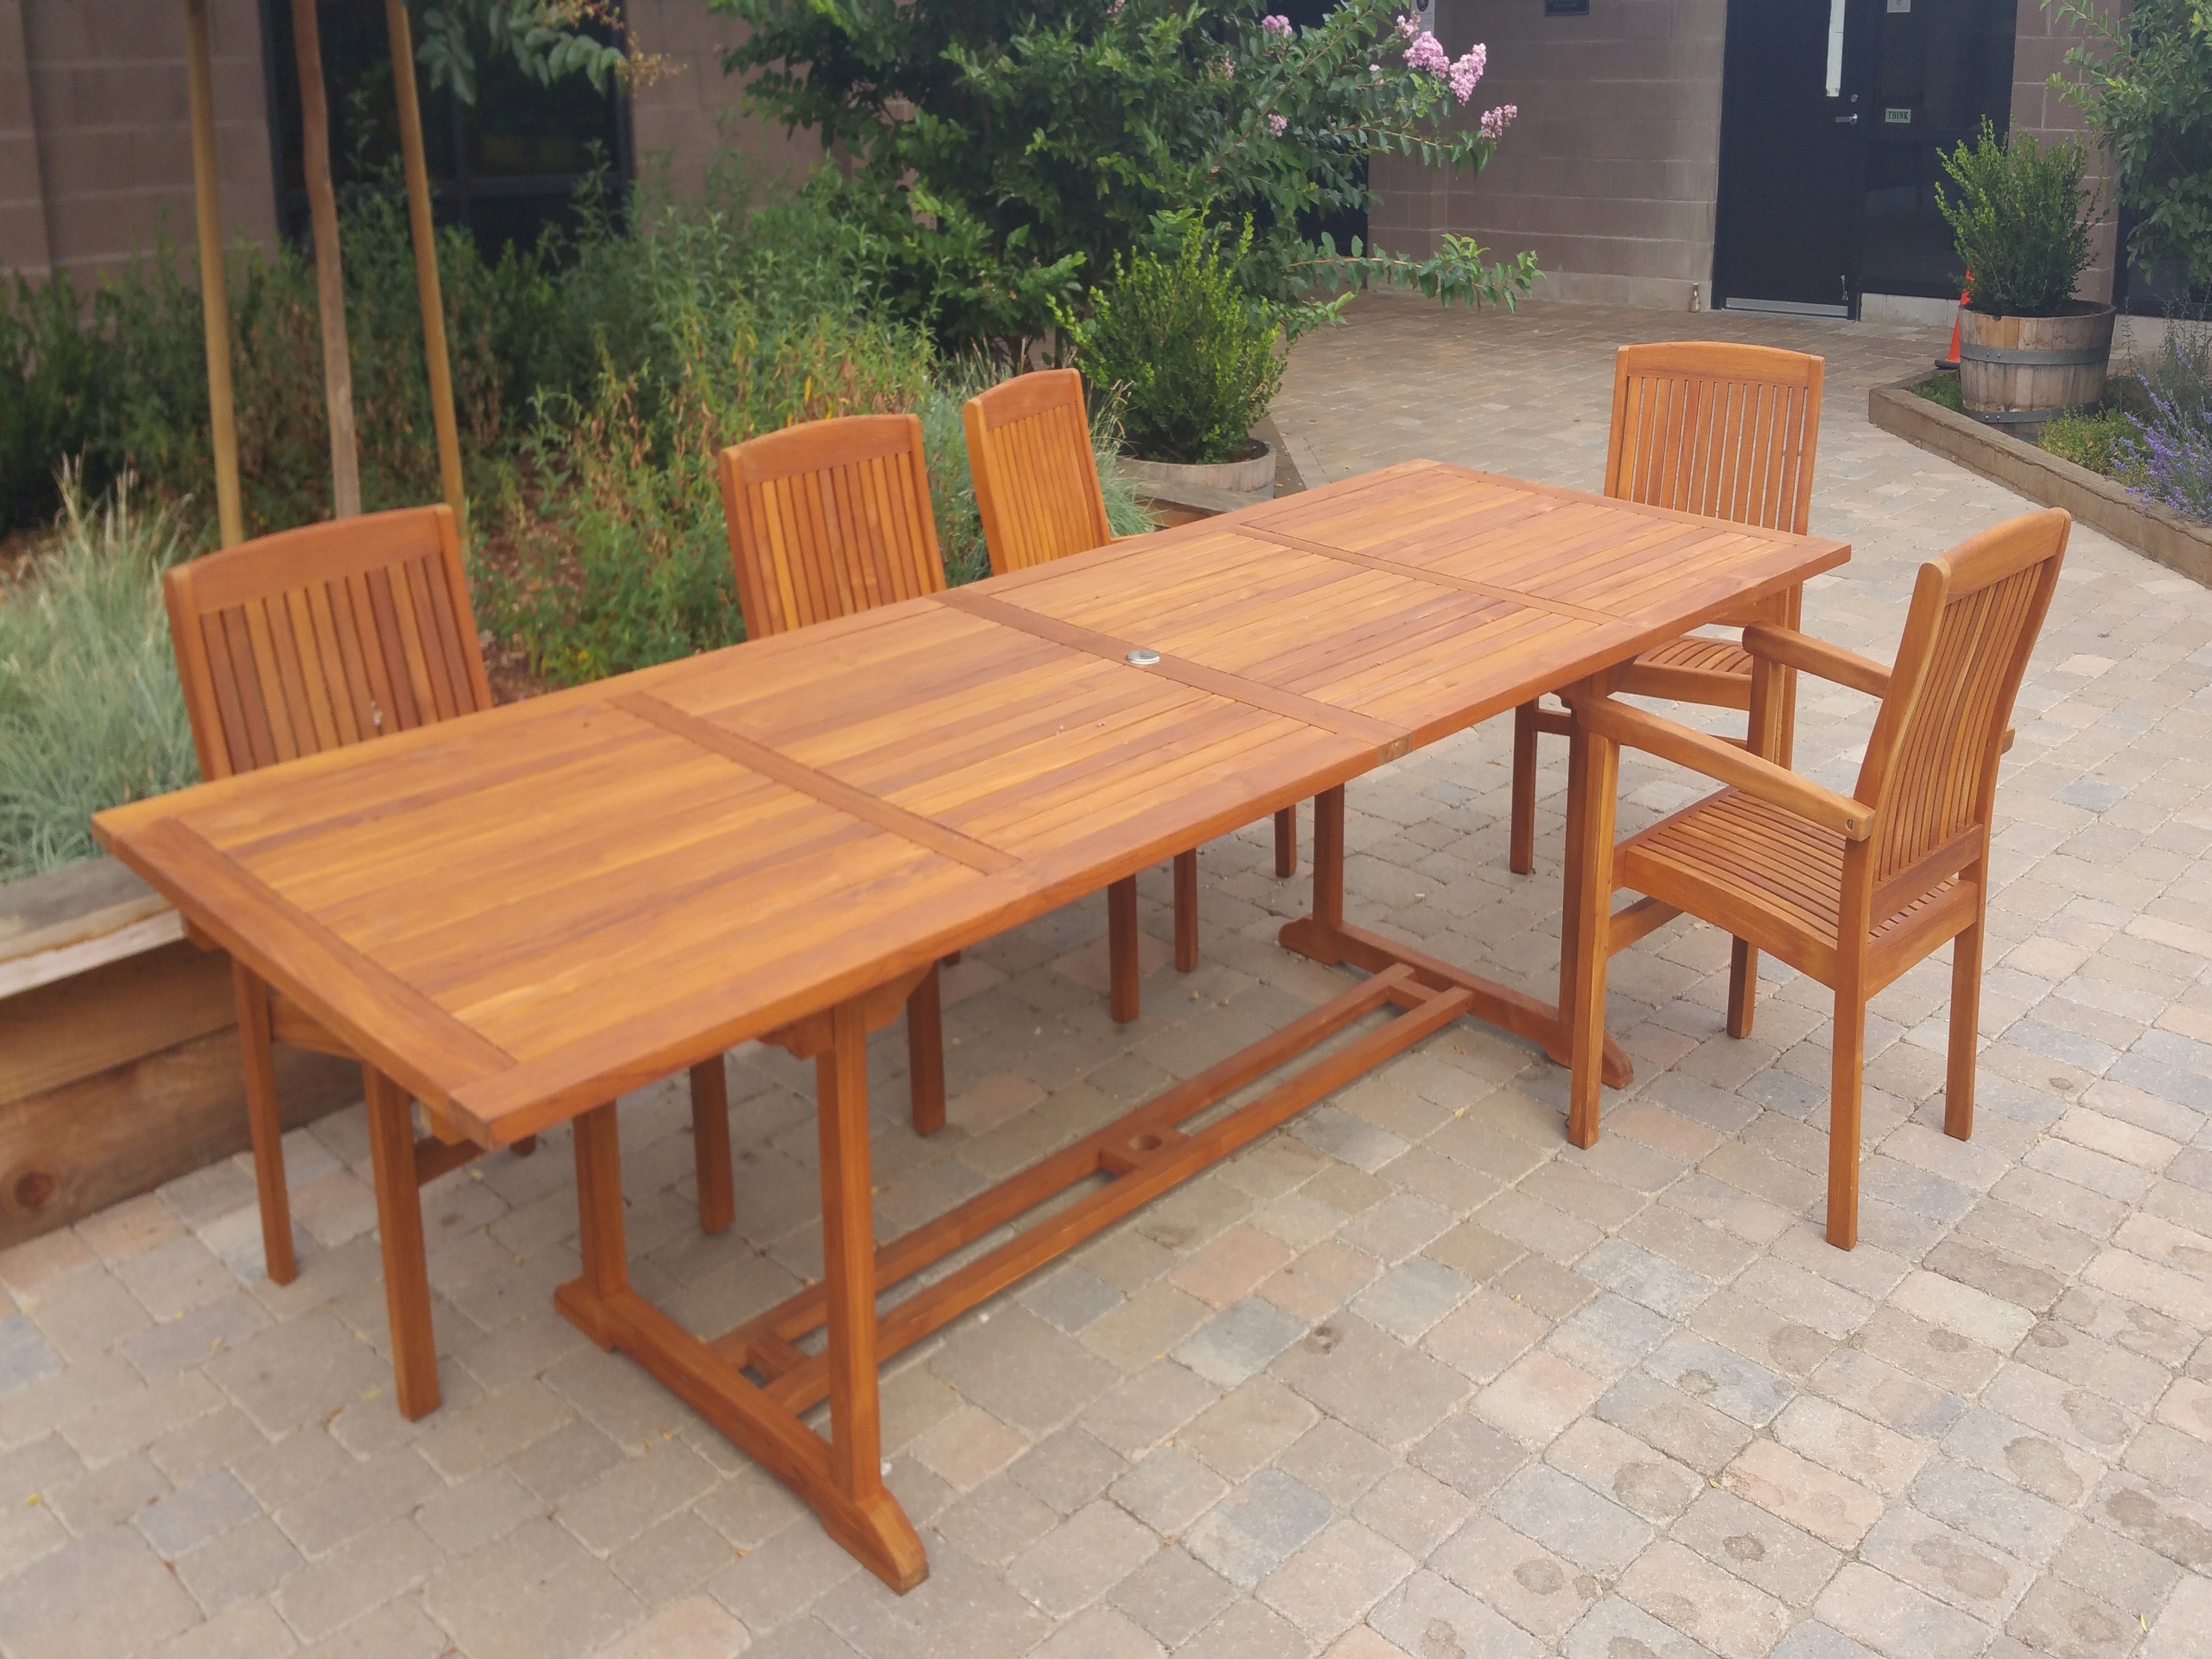 5 Easy Steps To Maintain Your Teak Furniture: DIY Tips